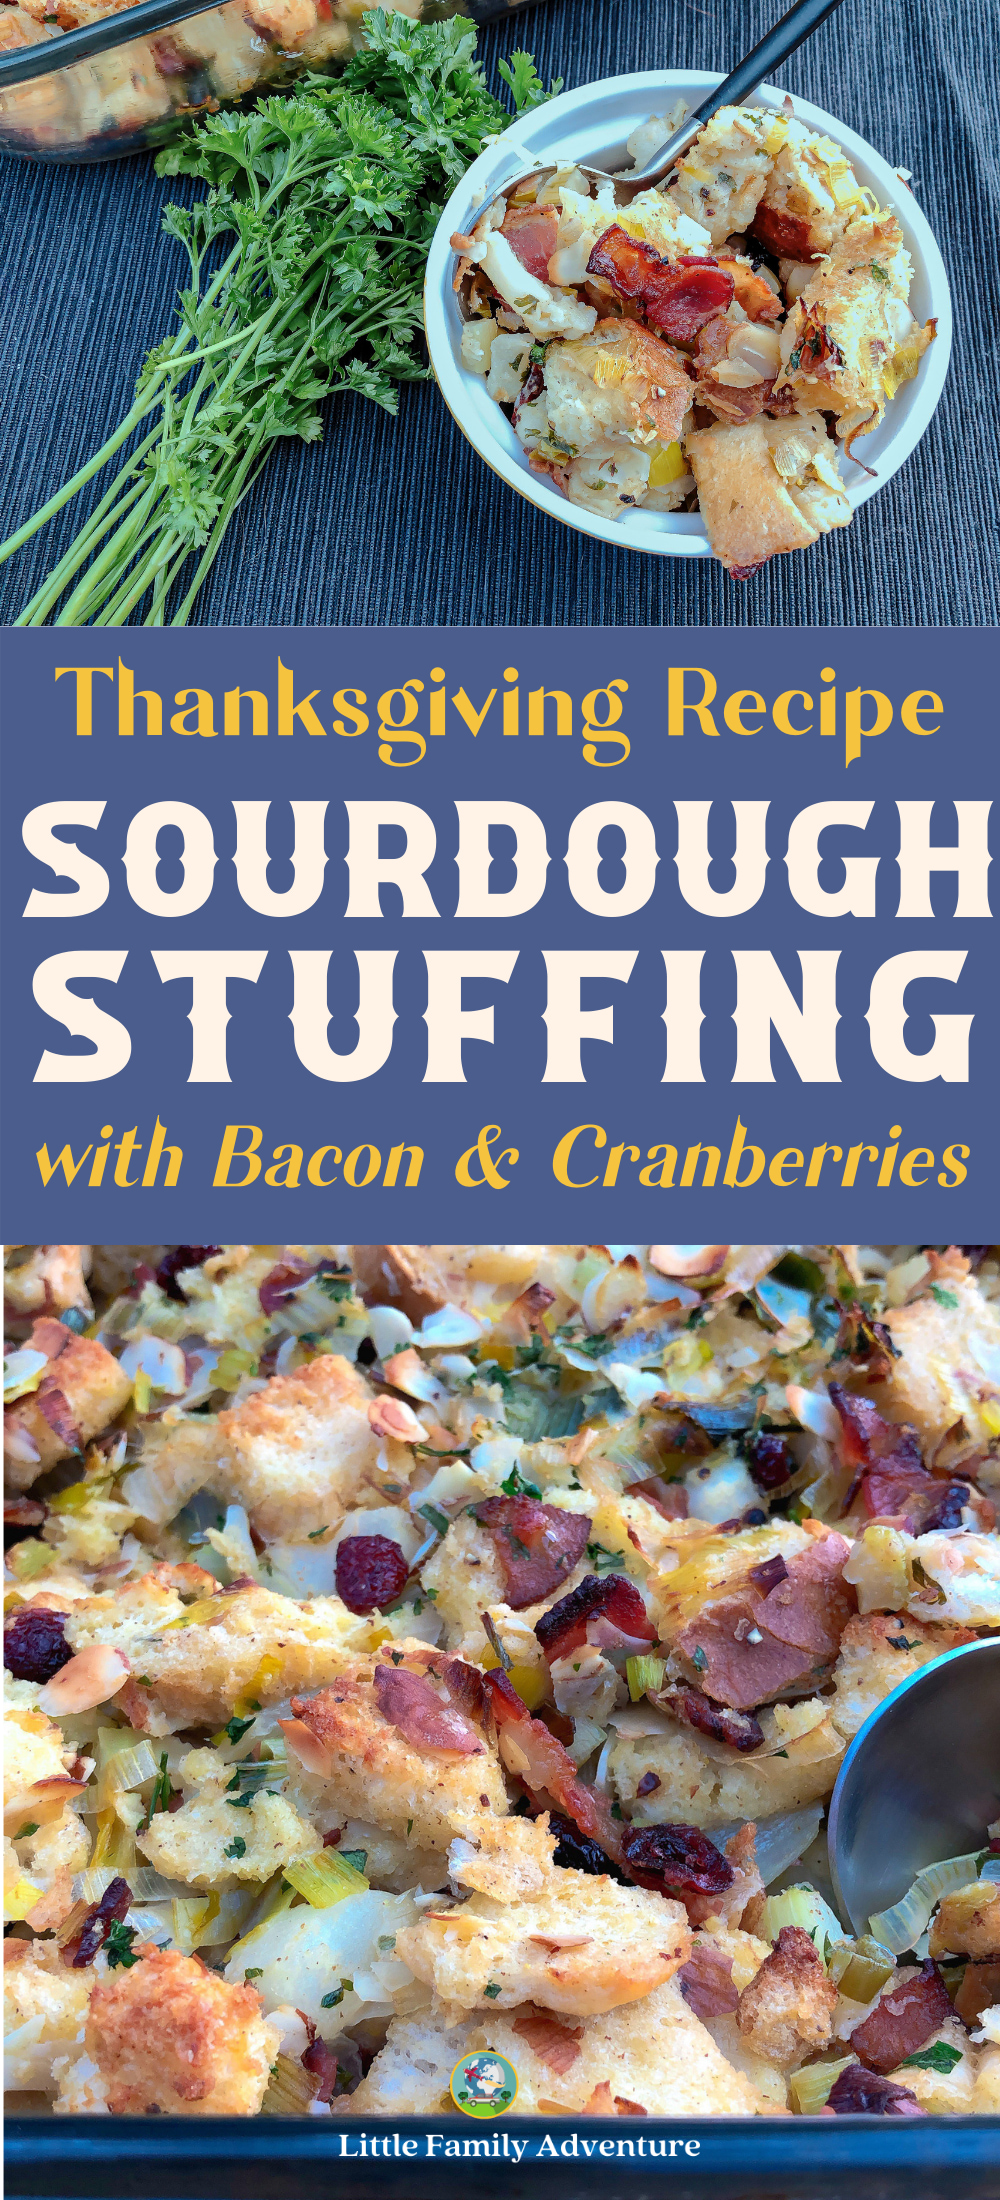 Bacon and Sourdough Stuffing Recipe with Dried Cranberries and Pear